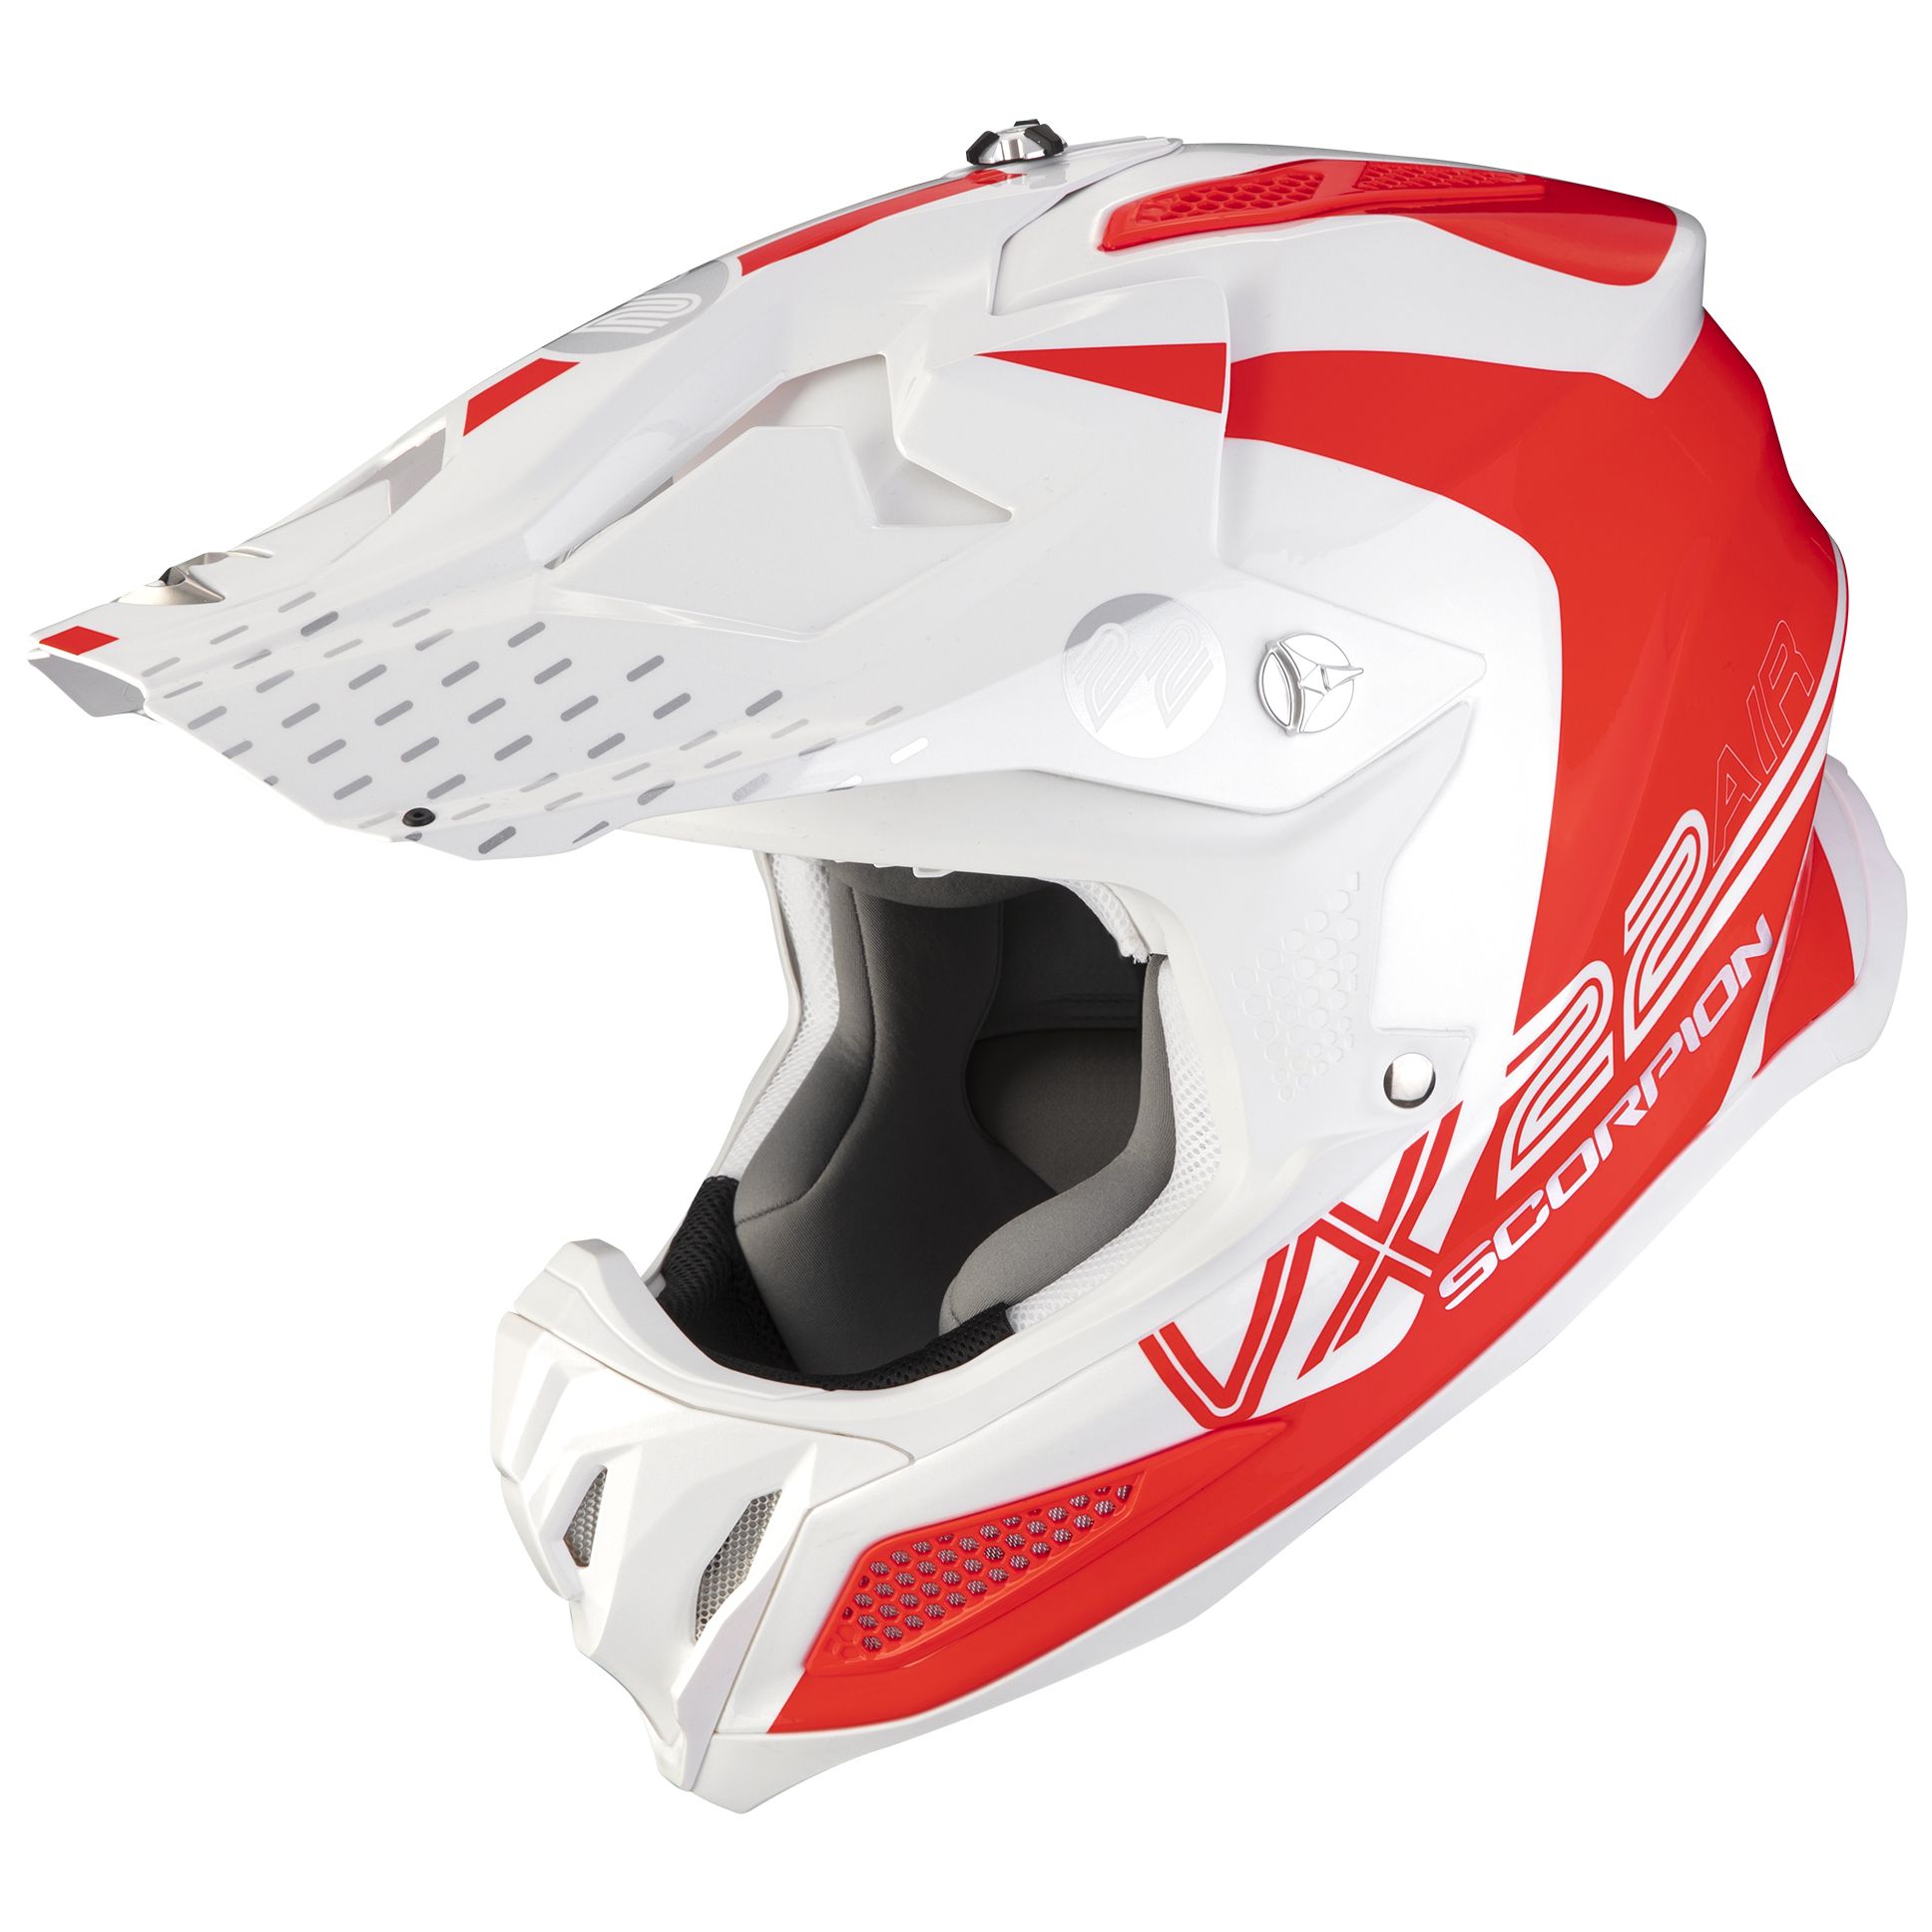 Image of Casque cross Scorpion Exo VX-22 AIR - ARES - BLANC ROUGE FLUO 2022